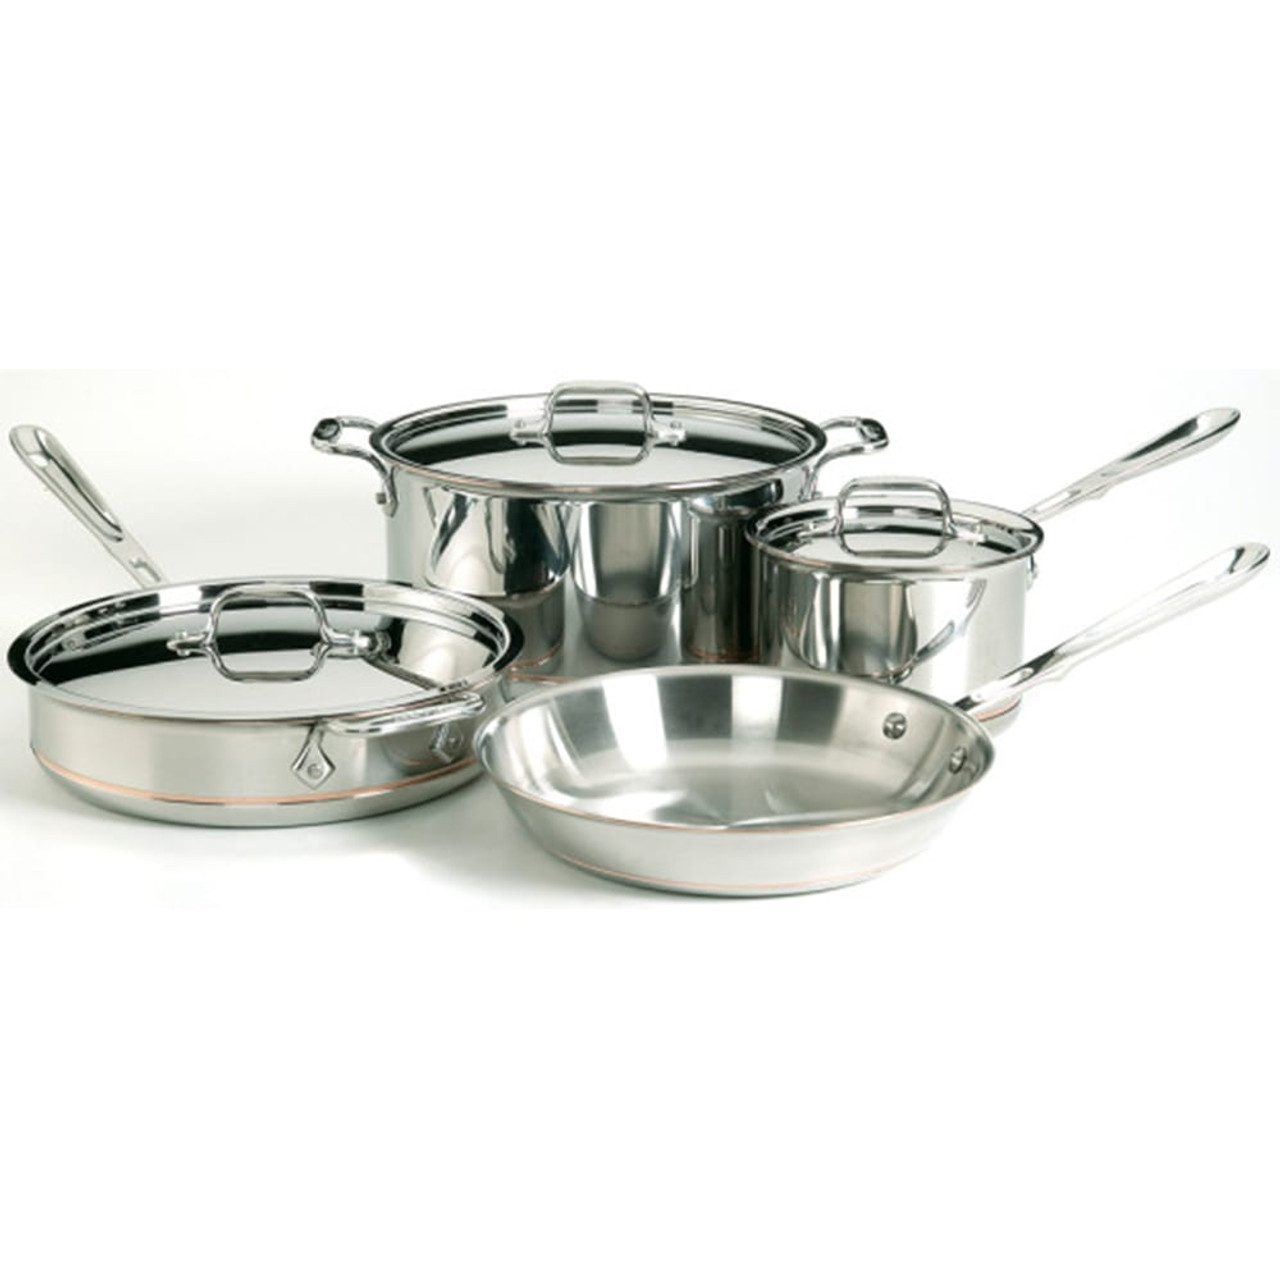 Cook Pro 506 7-Piece Tri-Ply Stainless Steel Cookware Set